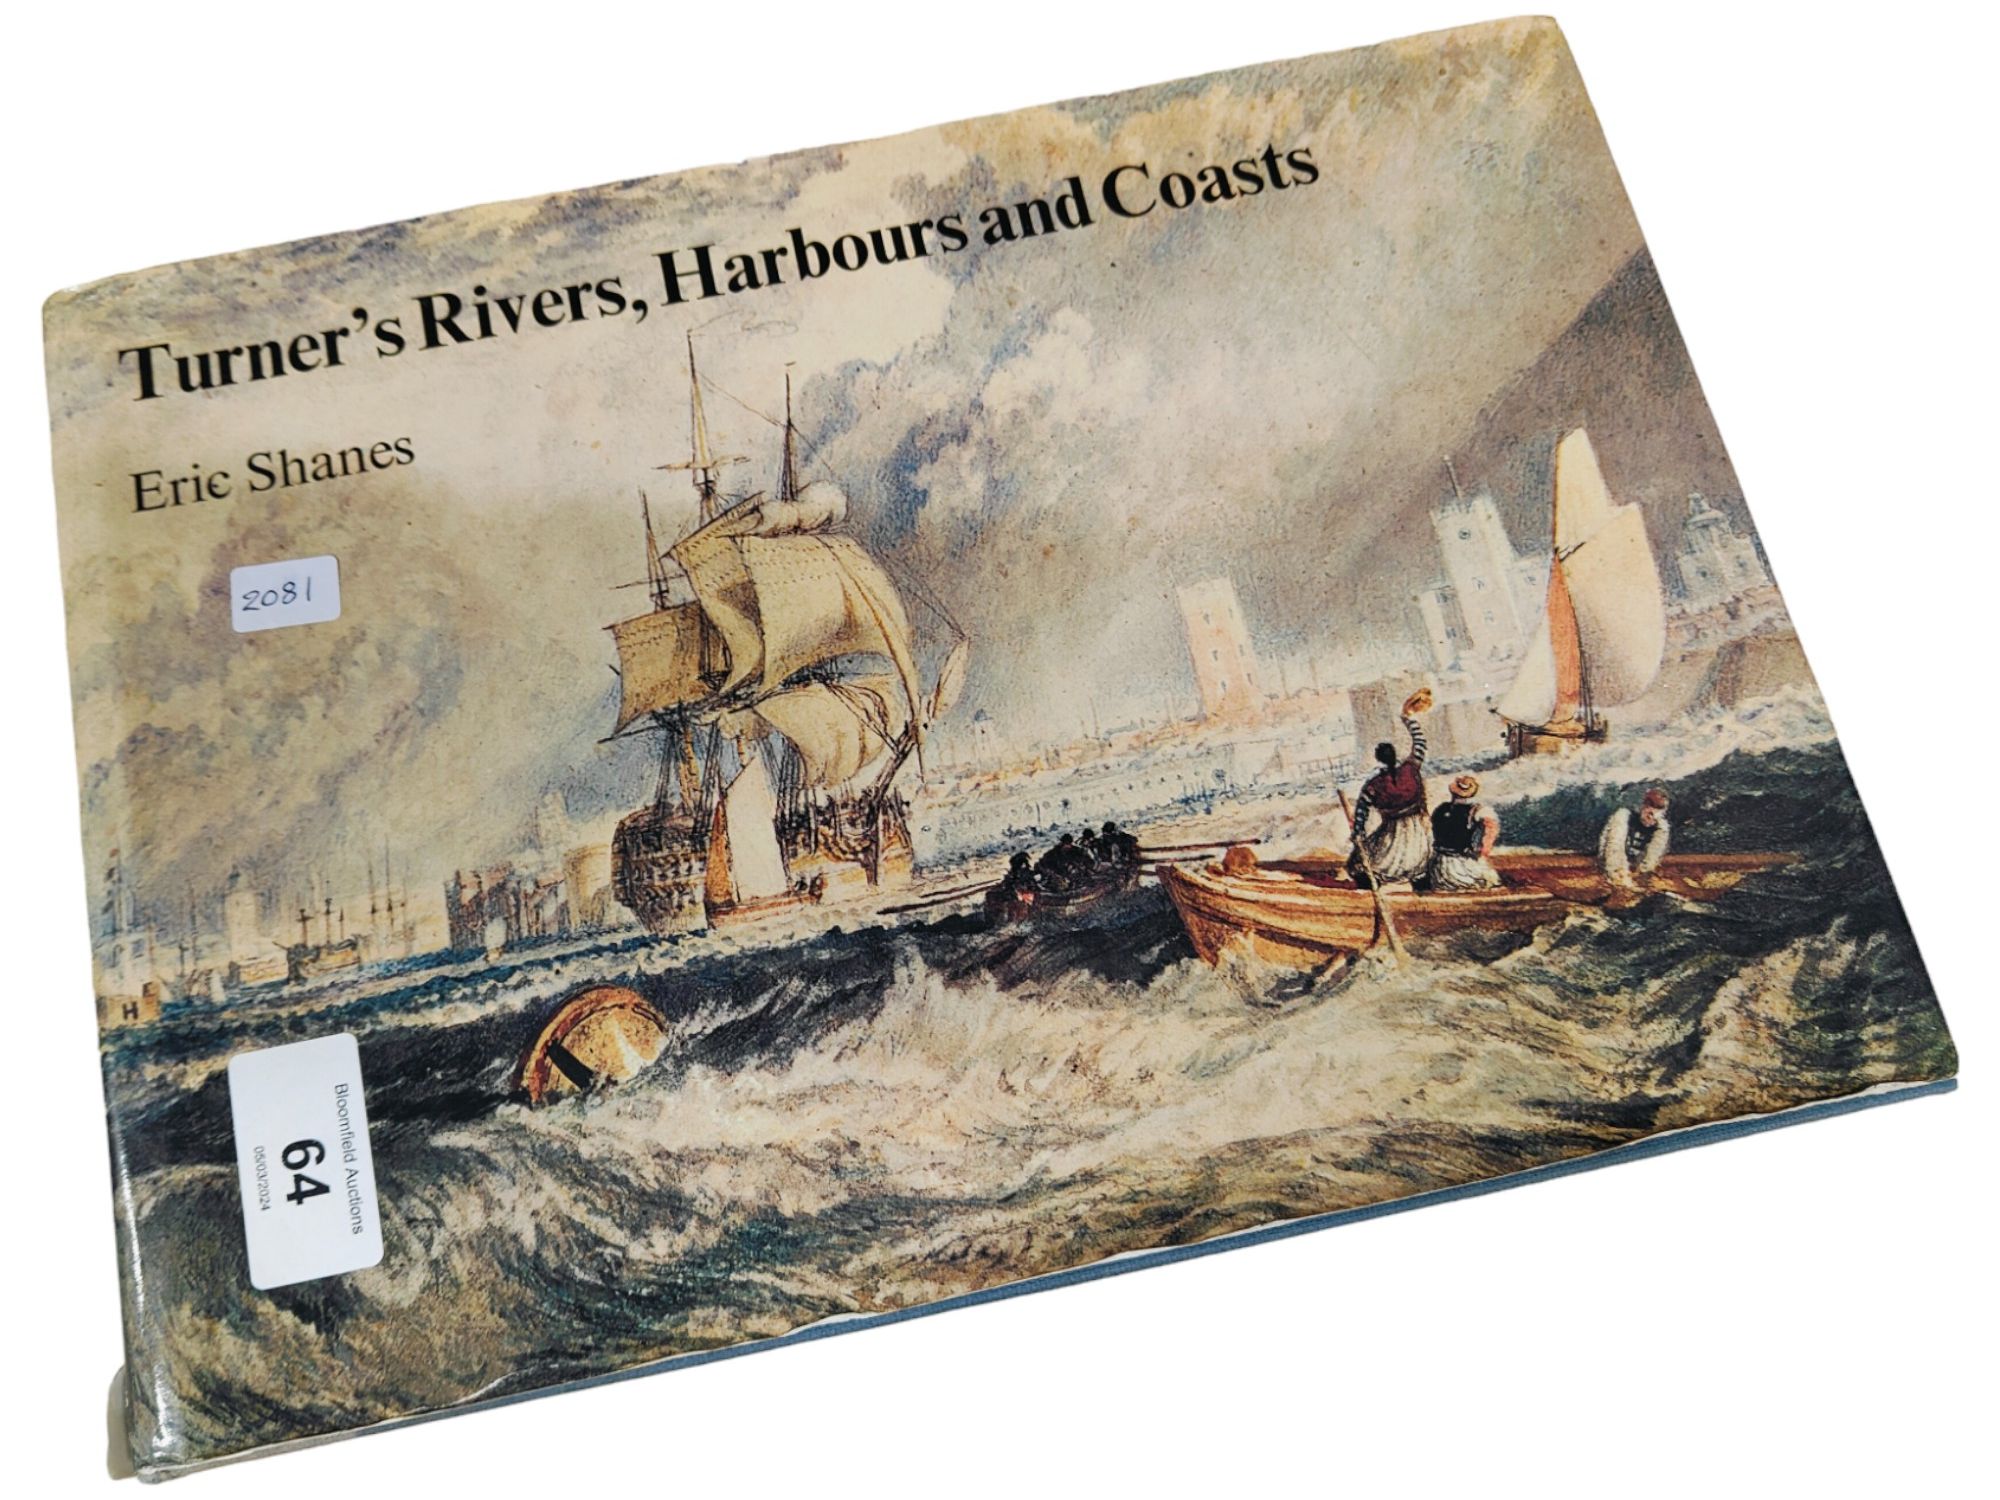 OLD BOOK: TURNERS RIVERS, HARBOURS & COASTS